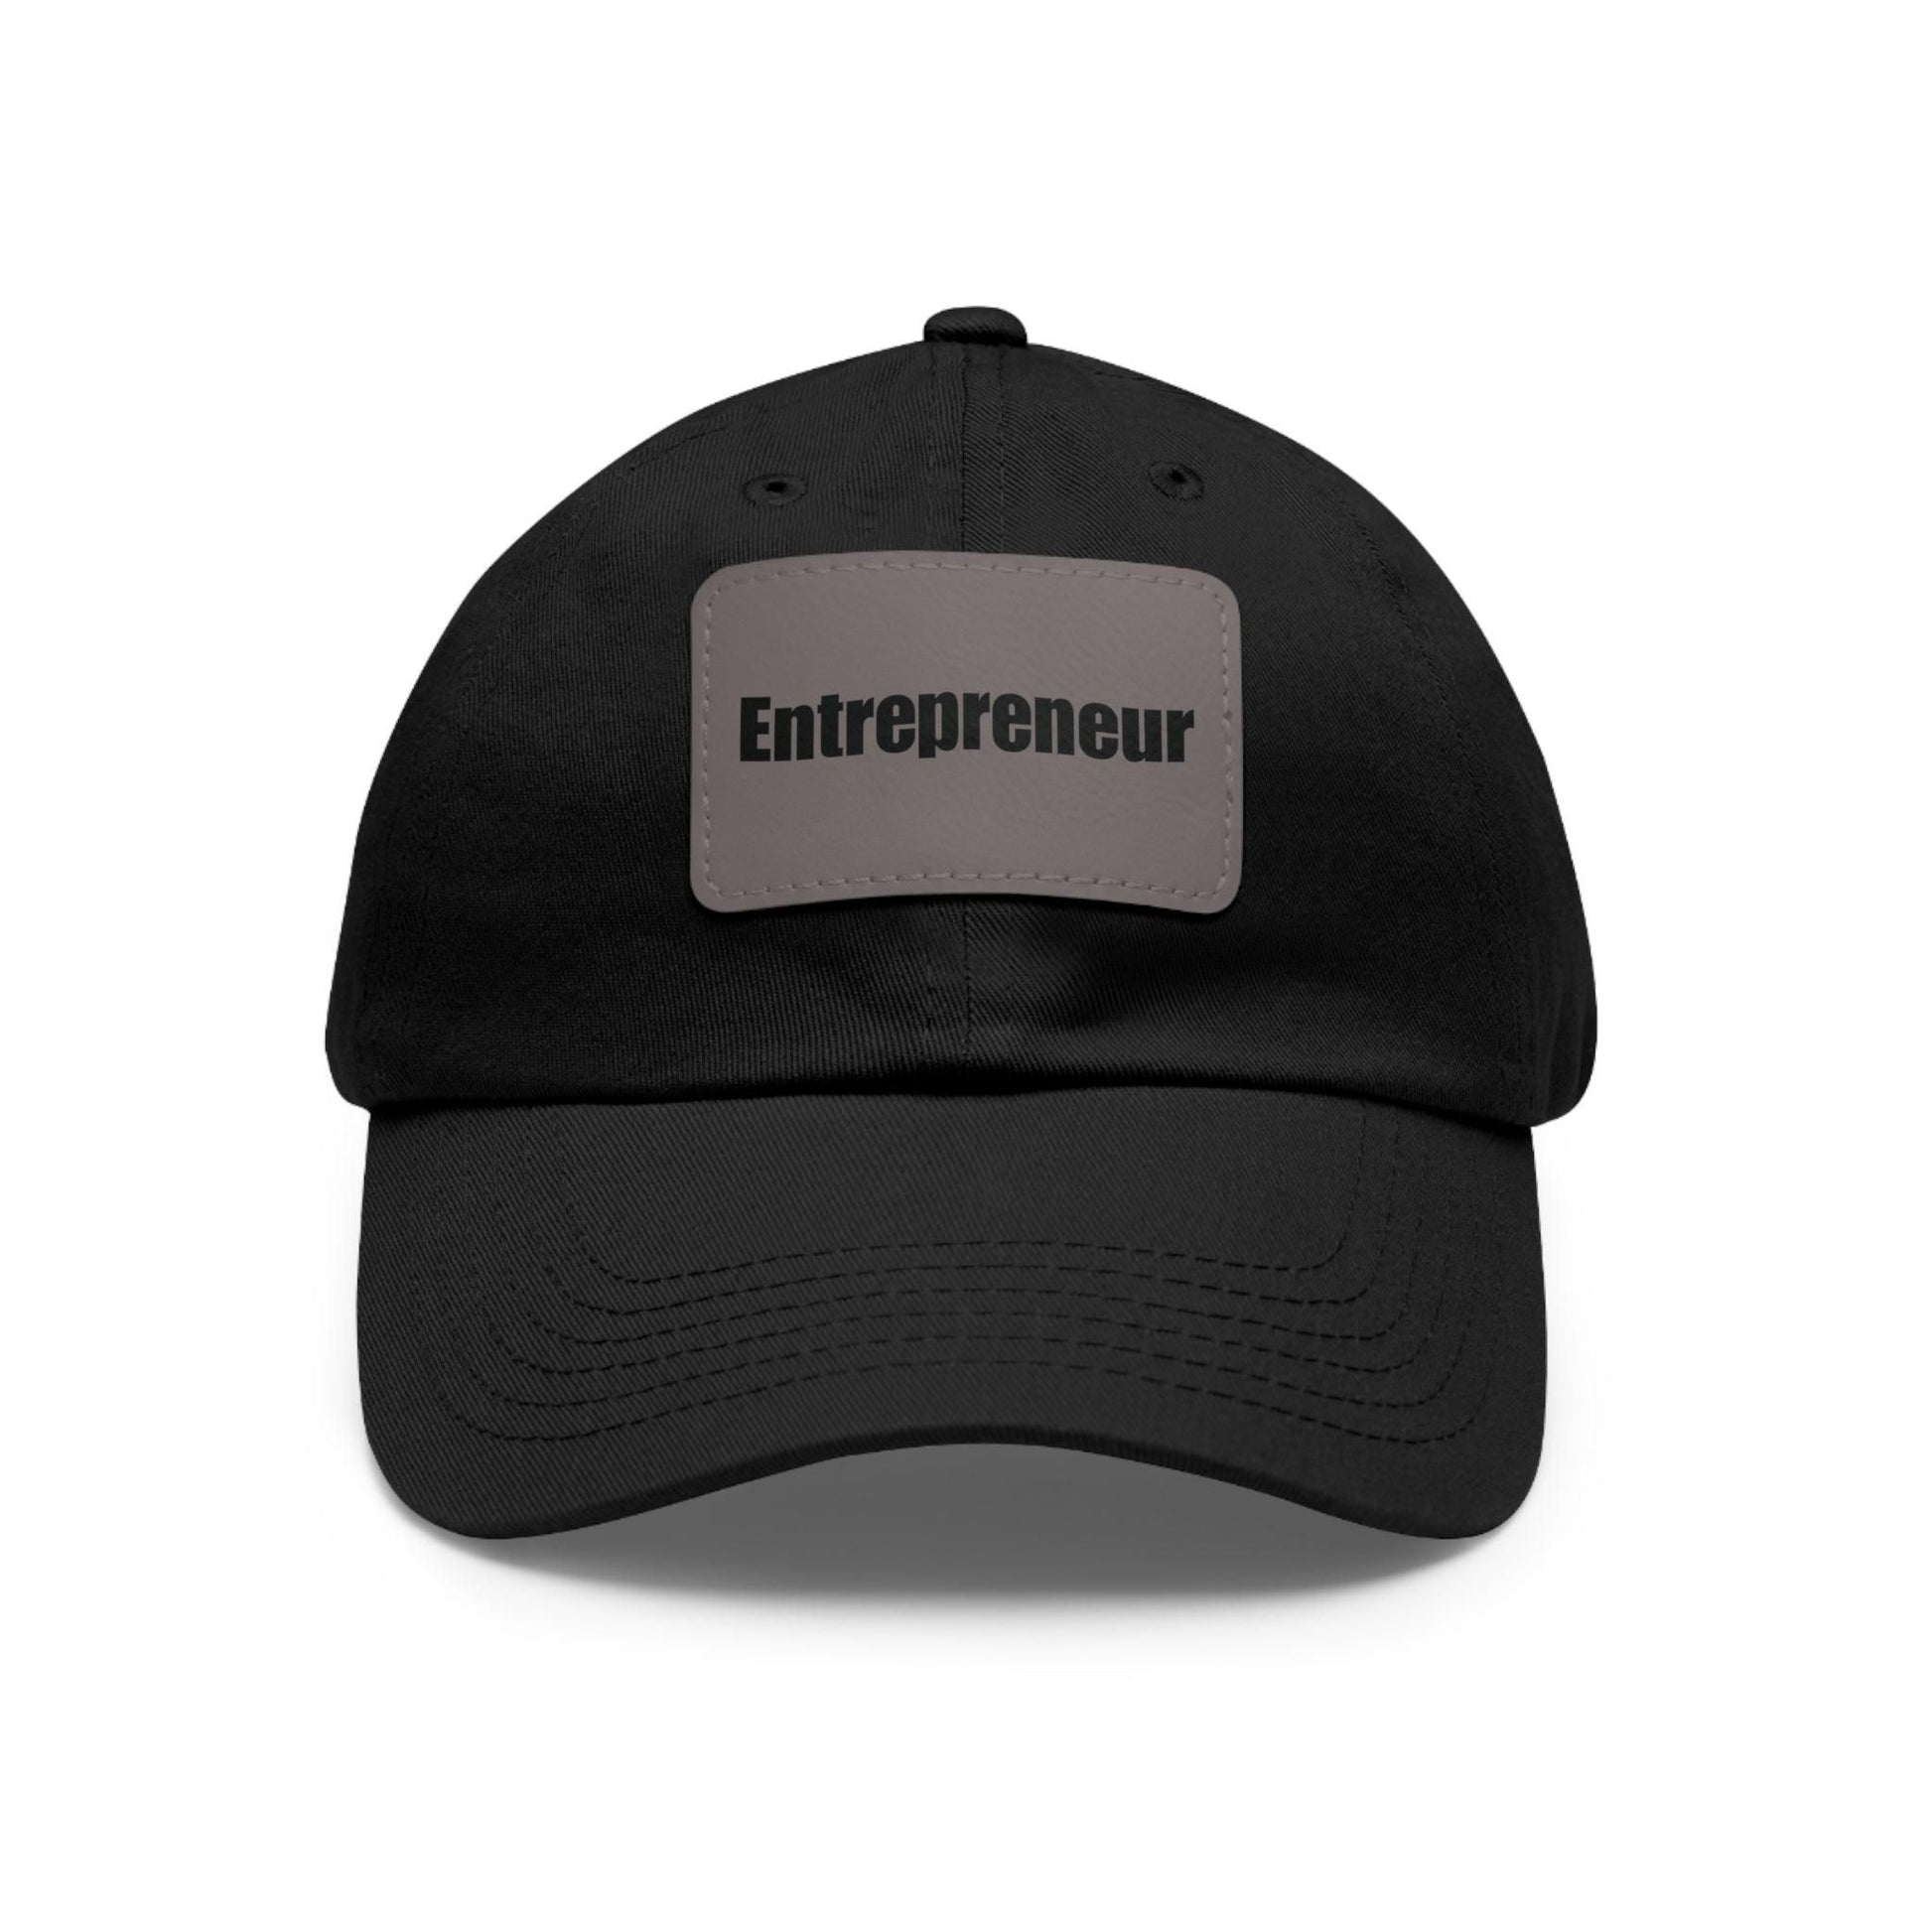 Entrepreneur Baseball Hat with Leather Patch Cap Black / Grey patch Rectangle One size